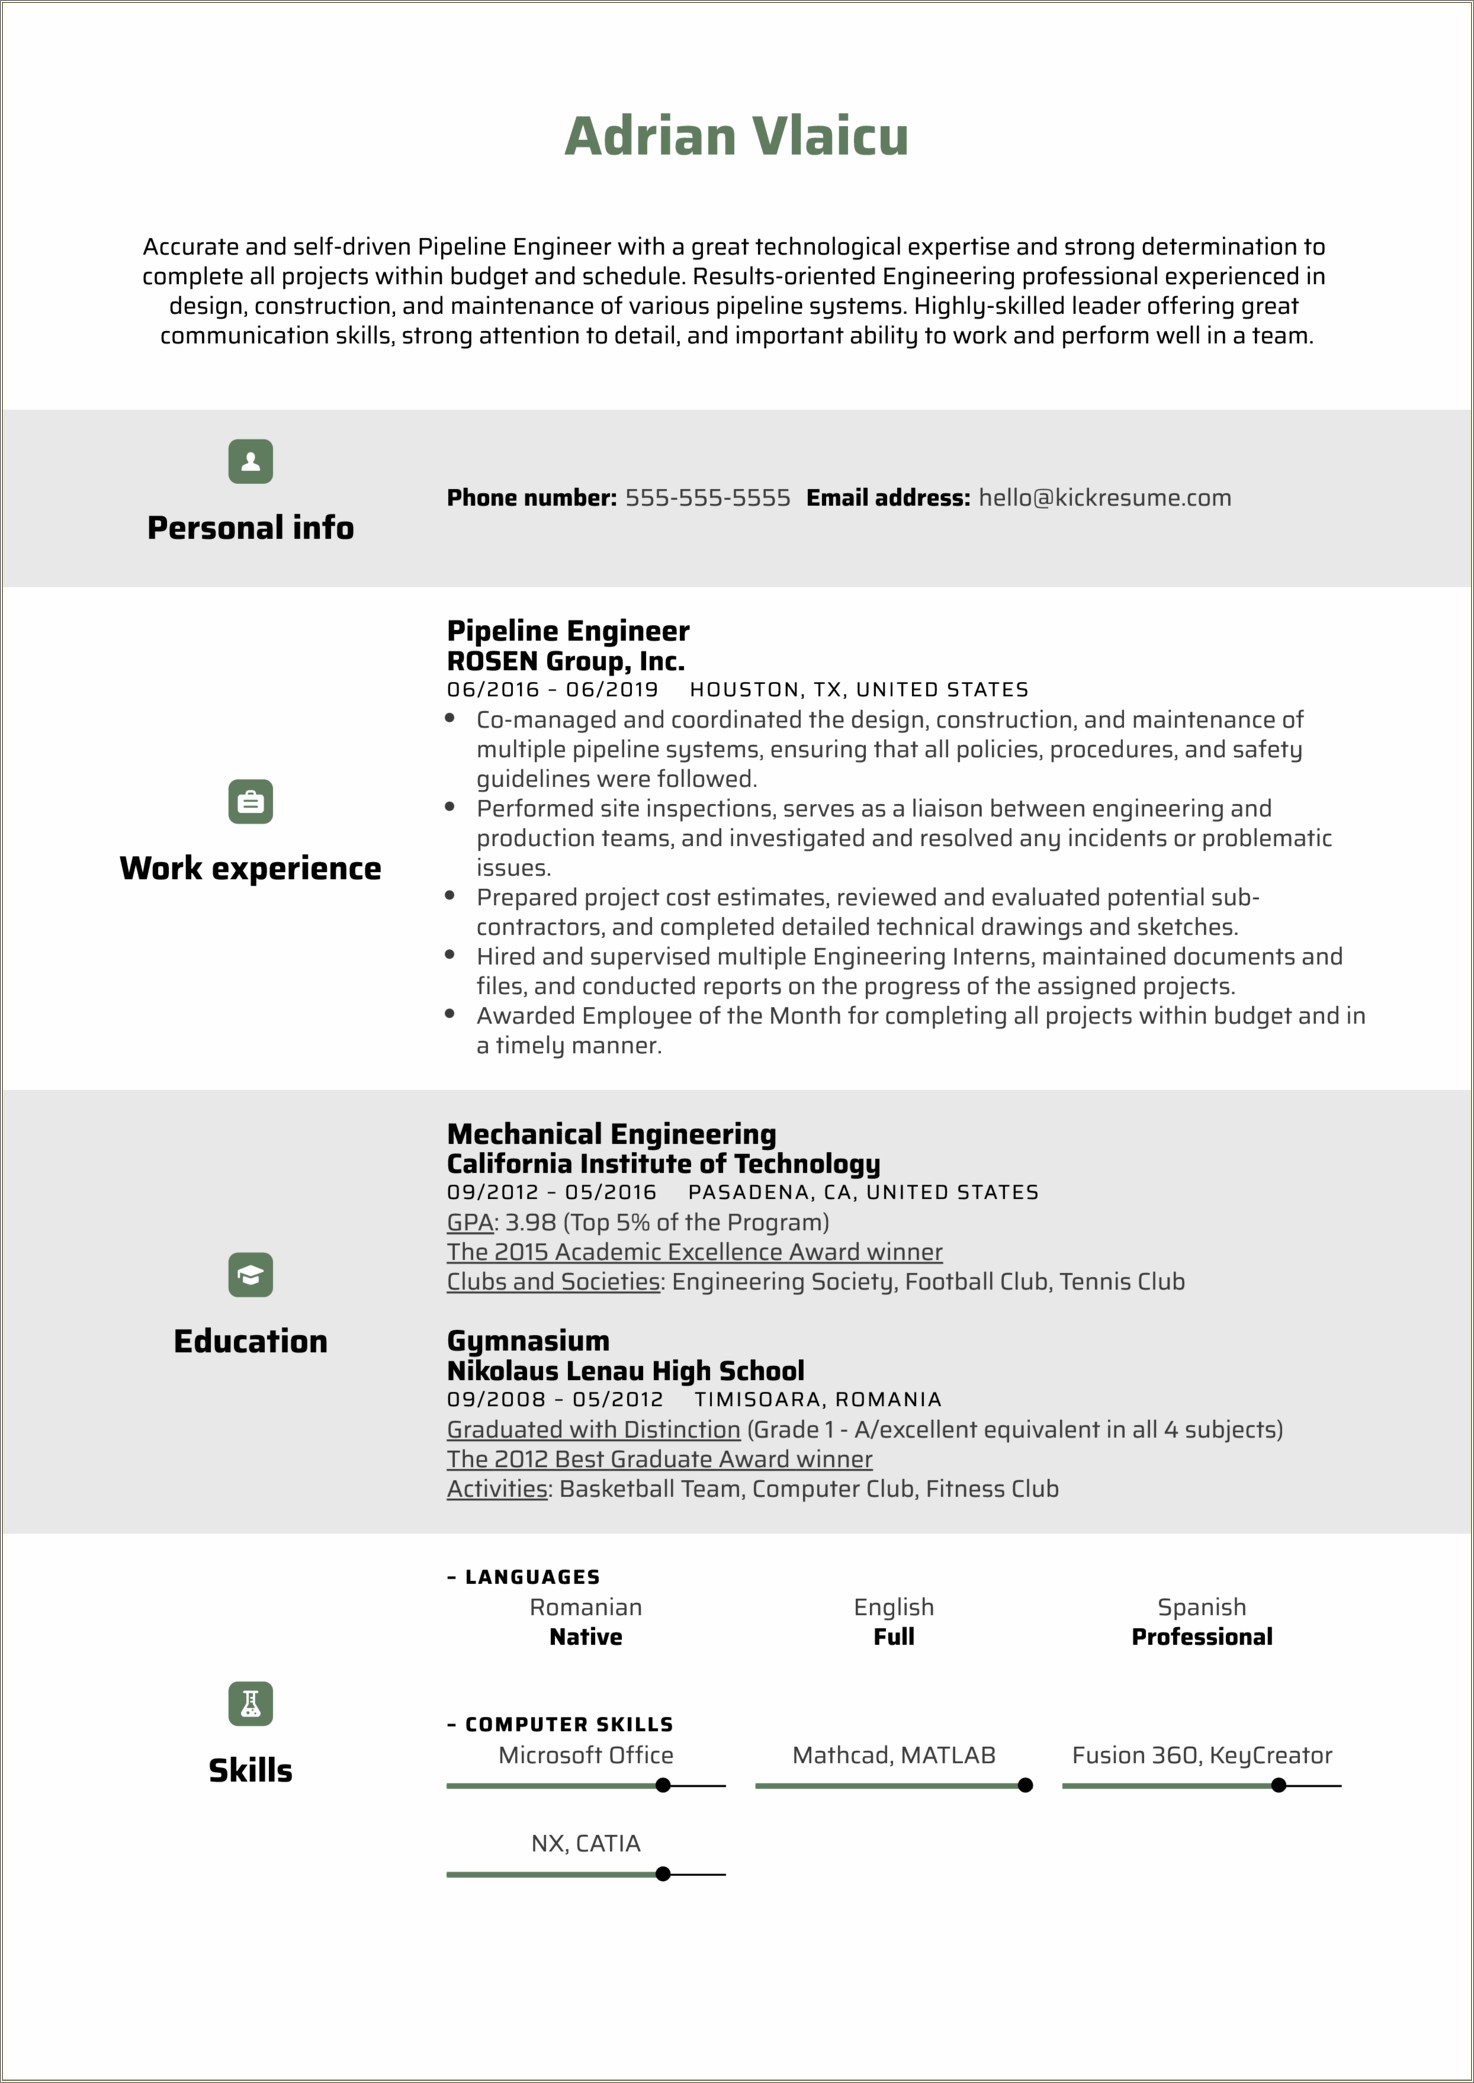 Sample Resume For Piping Design Engineer